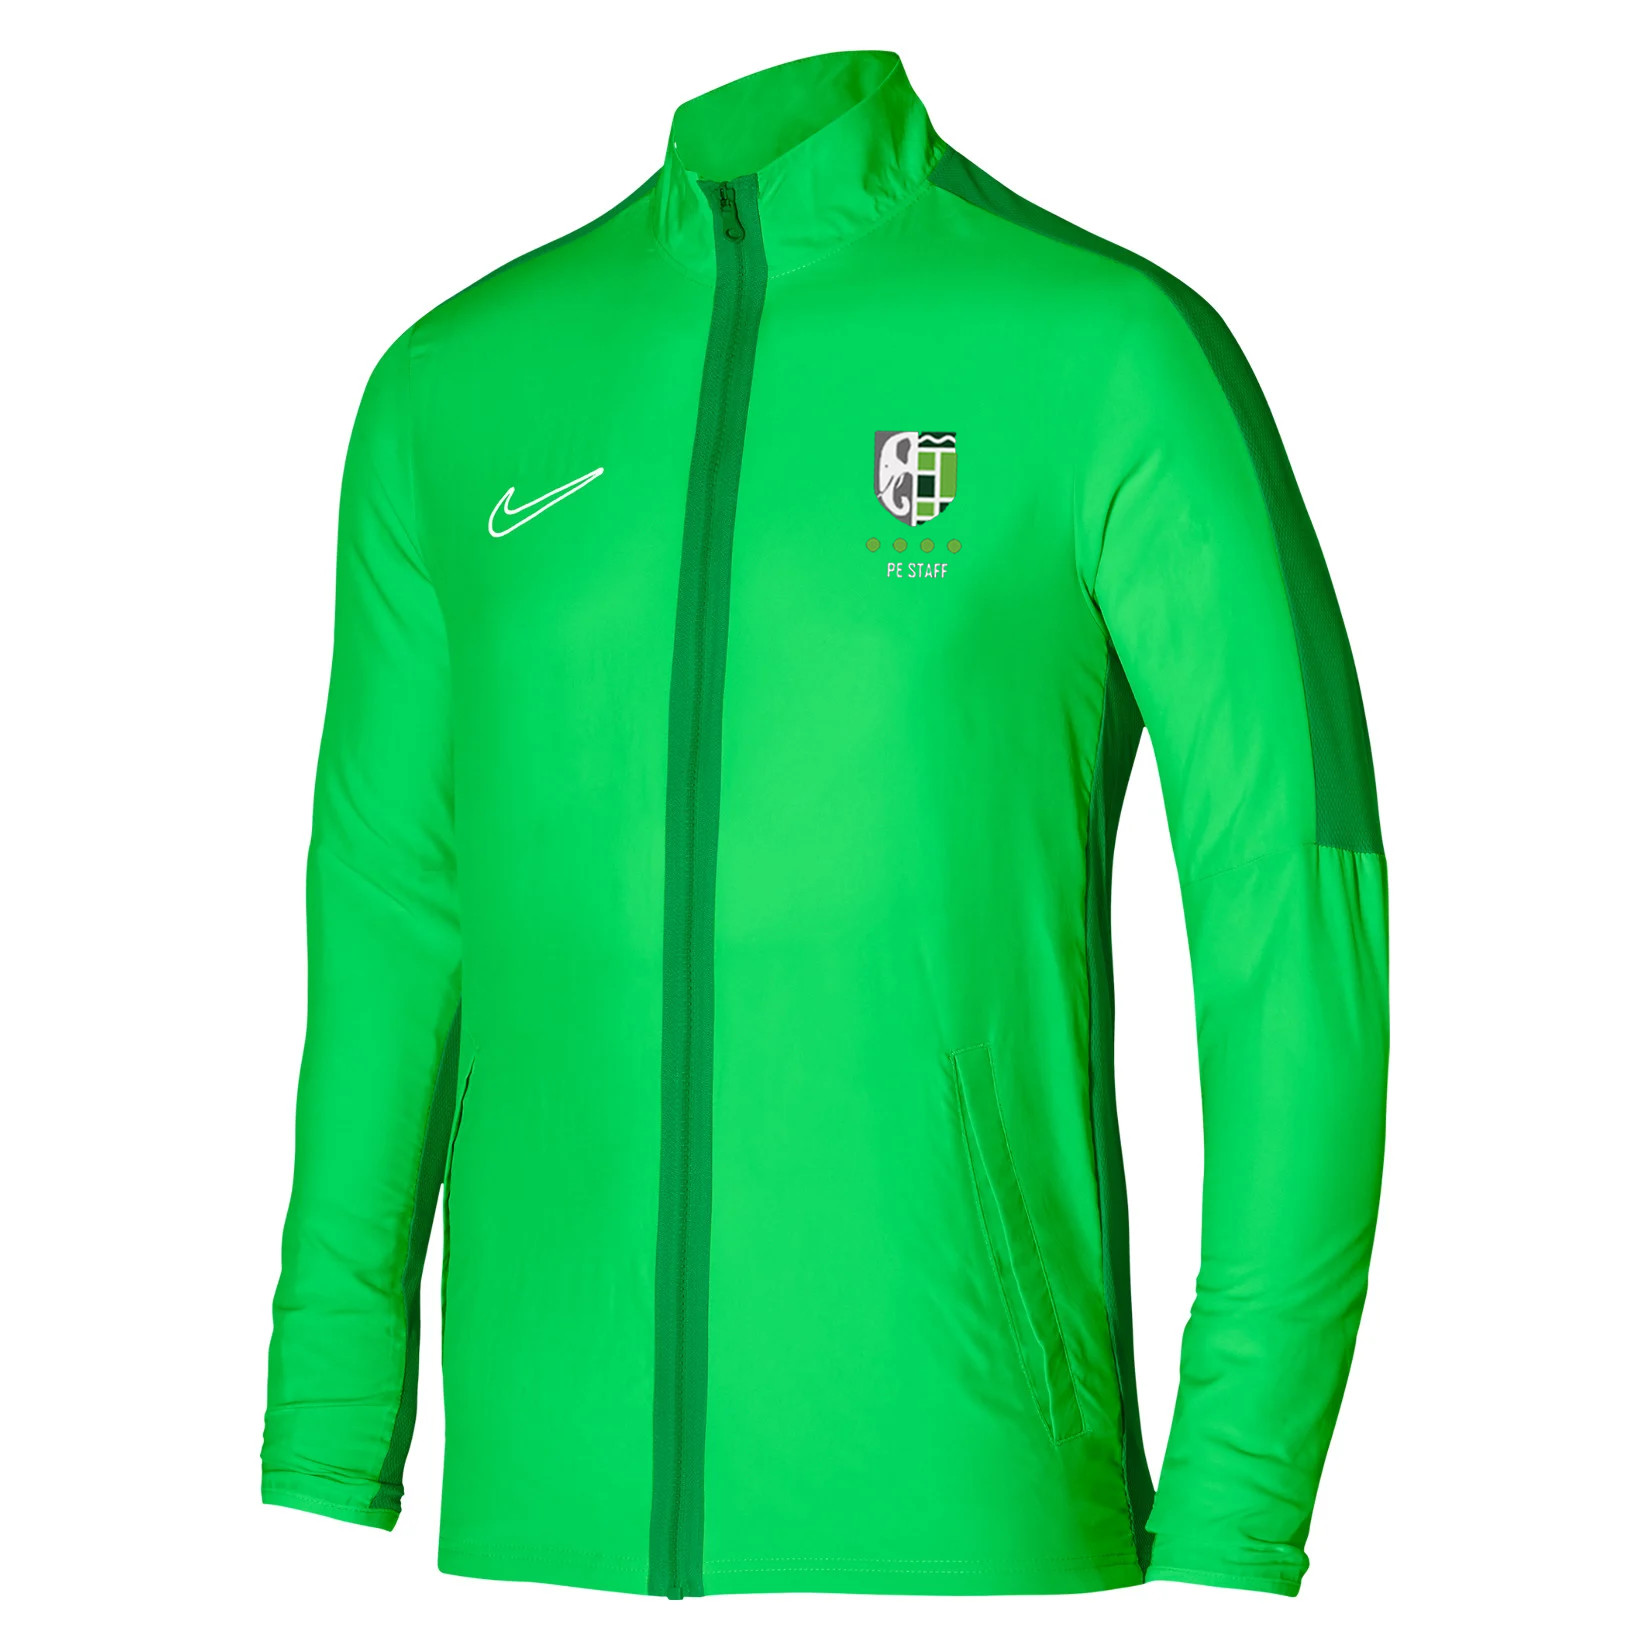 Nike Dri-Fit Academy 23 Woven Track Jacket Green Spark-Lucky Green-White